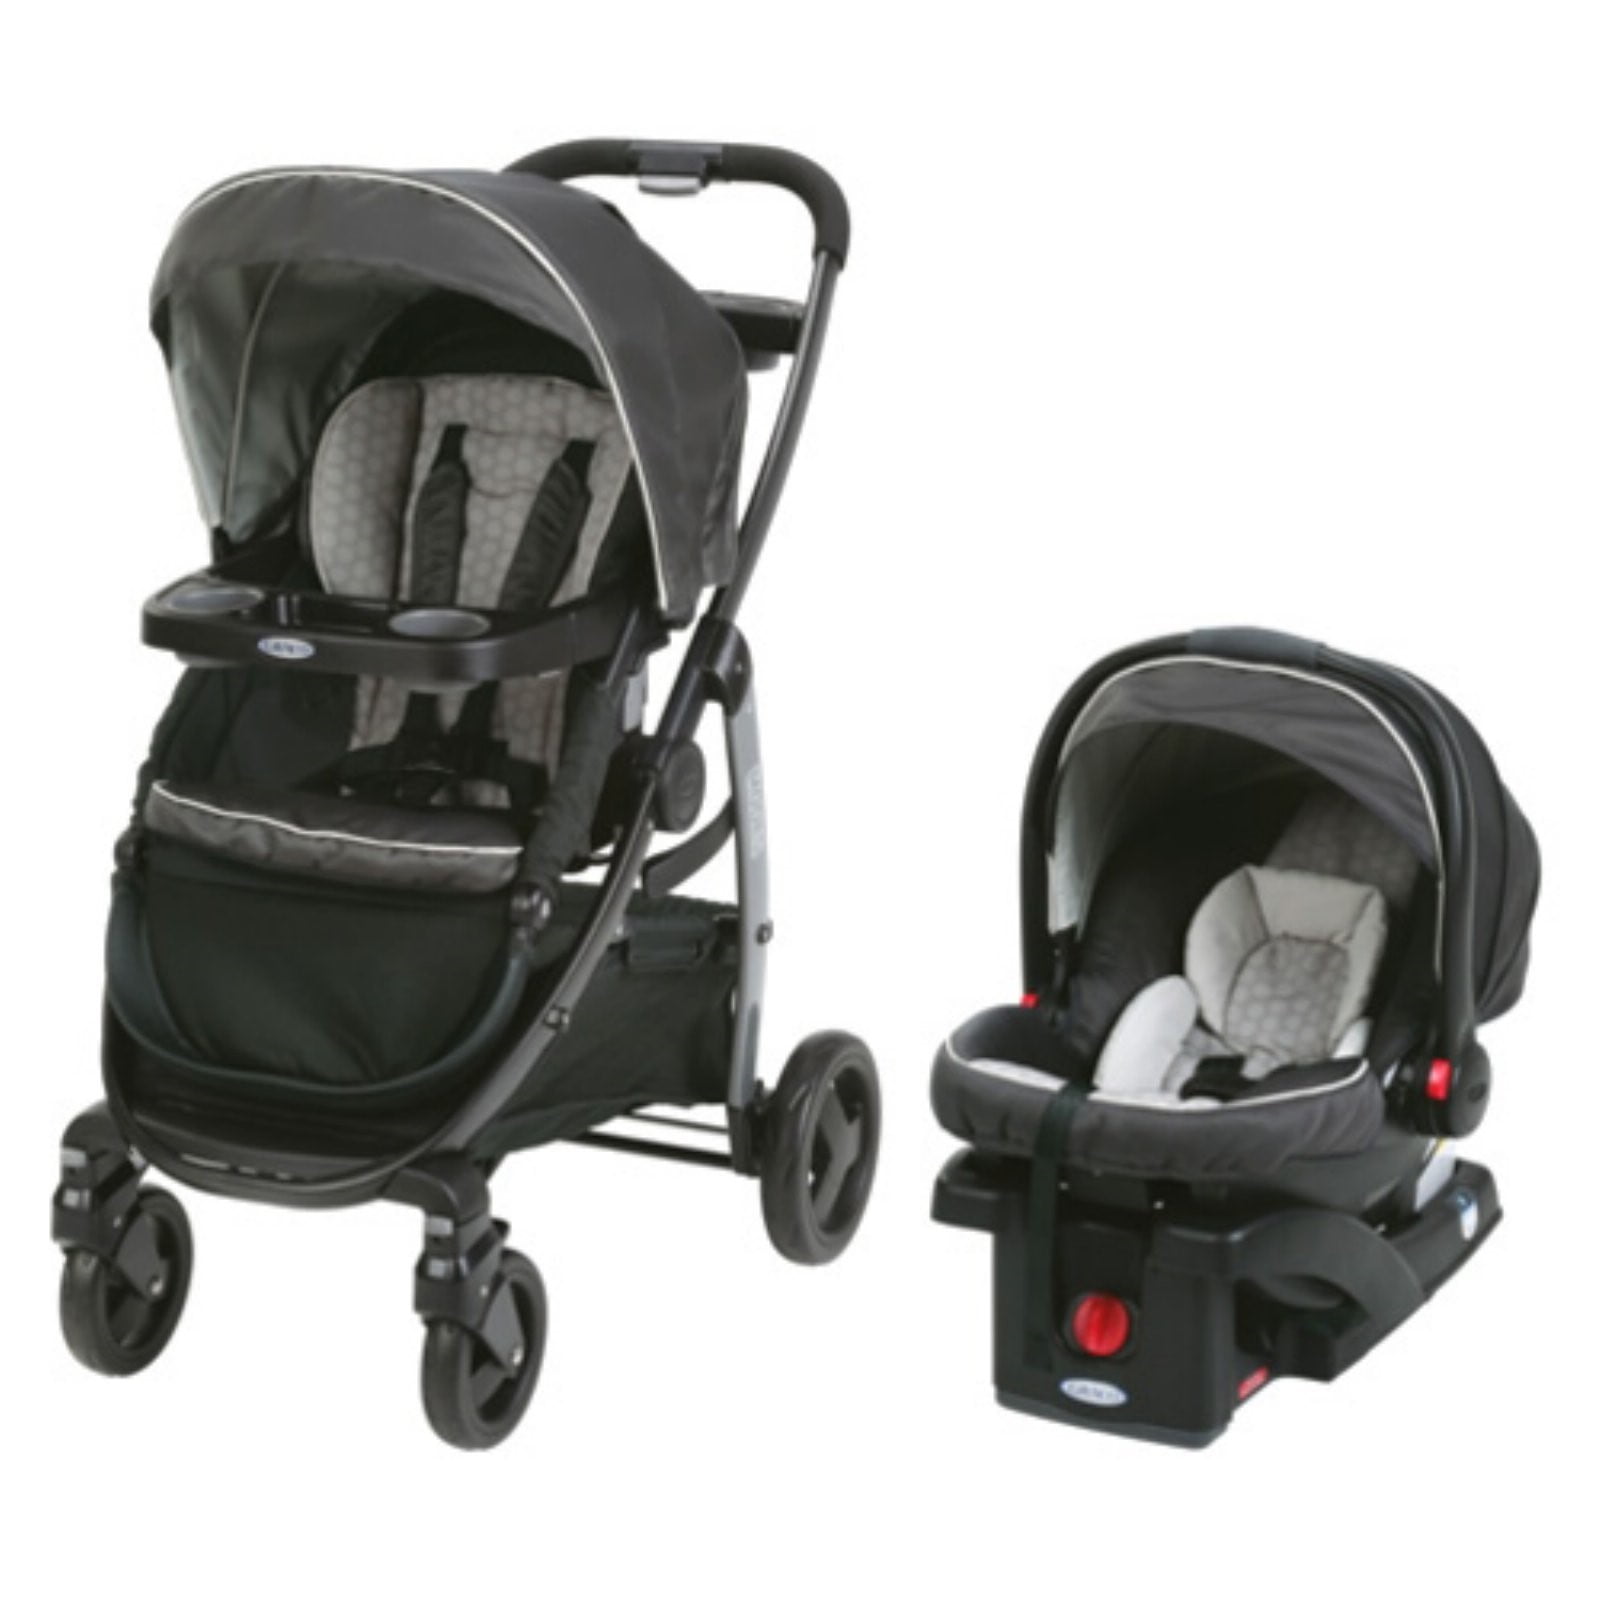 Graco Modes Click Connect Travel System 